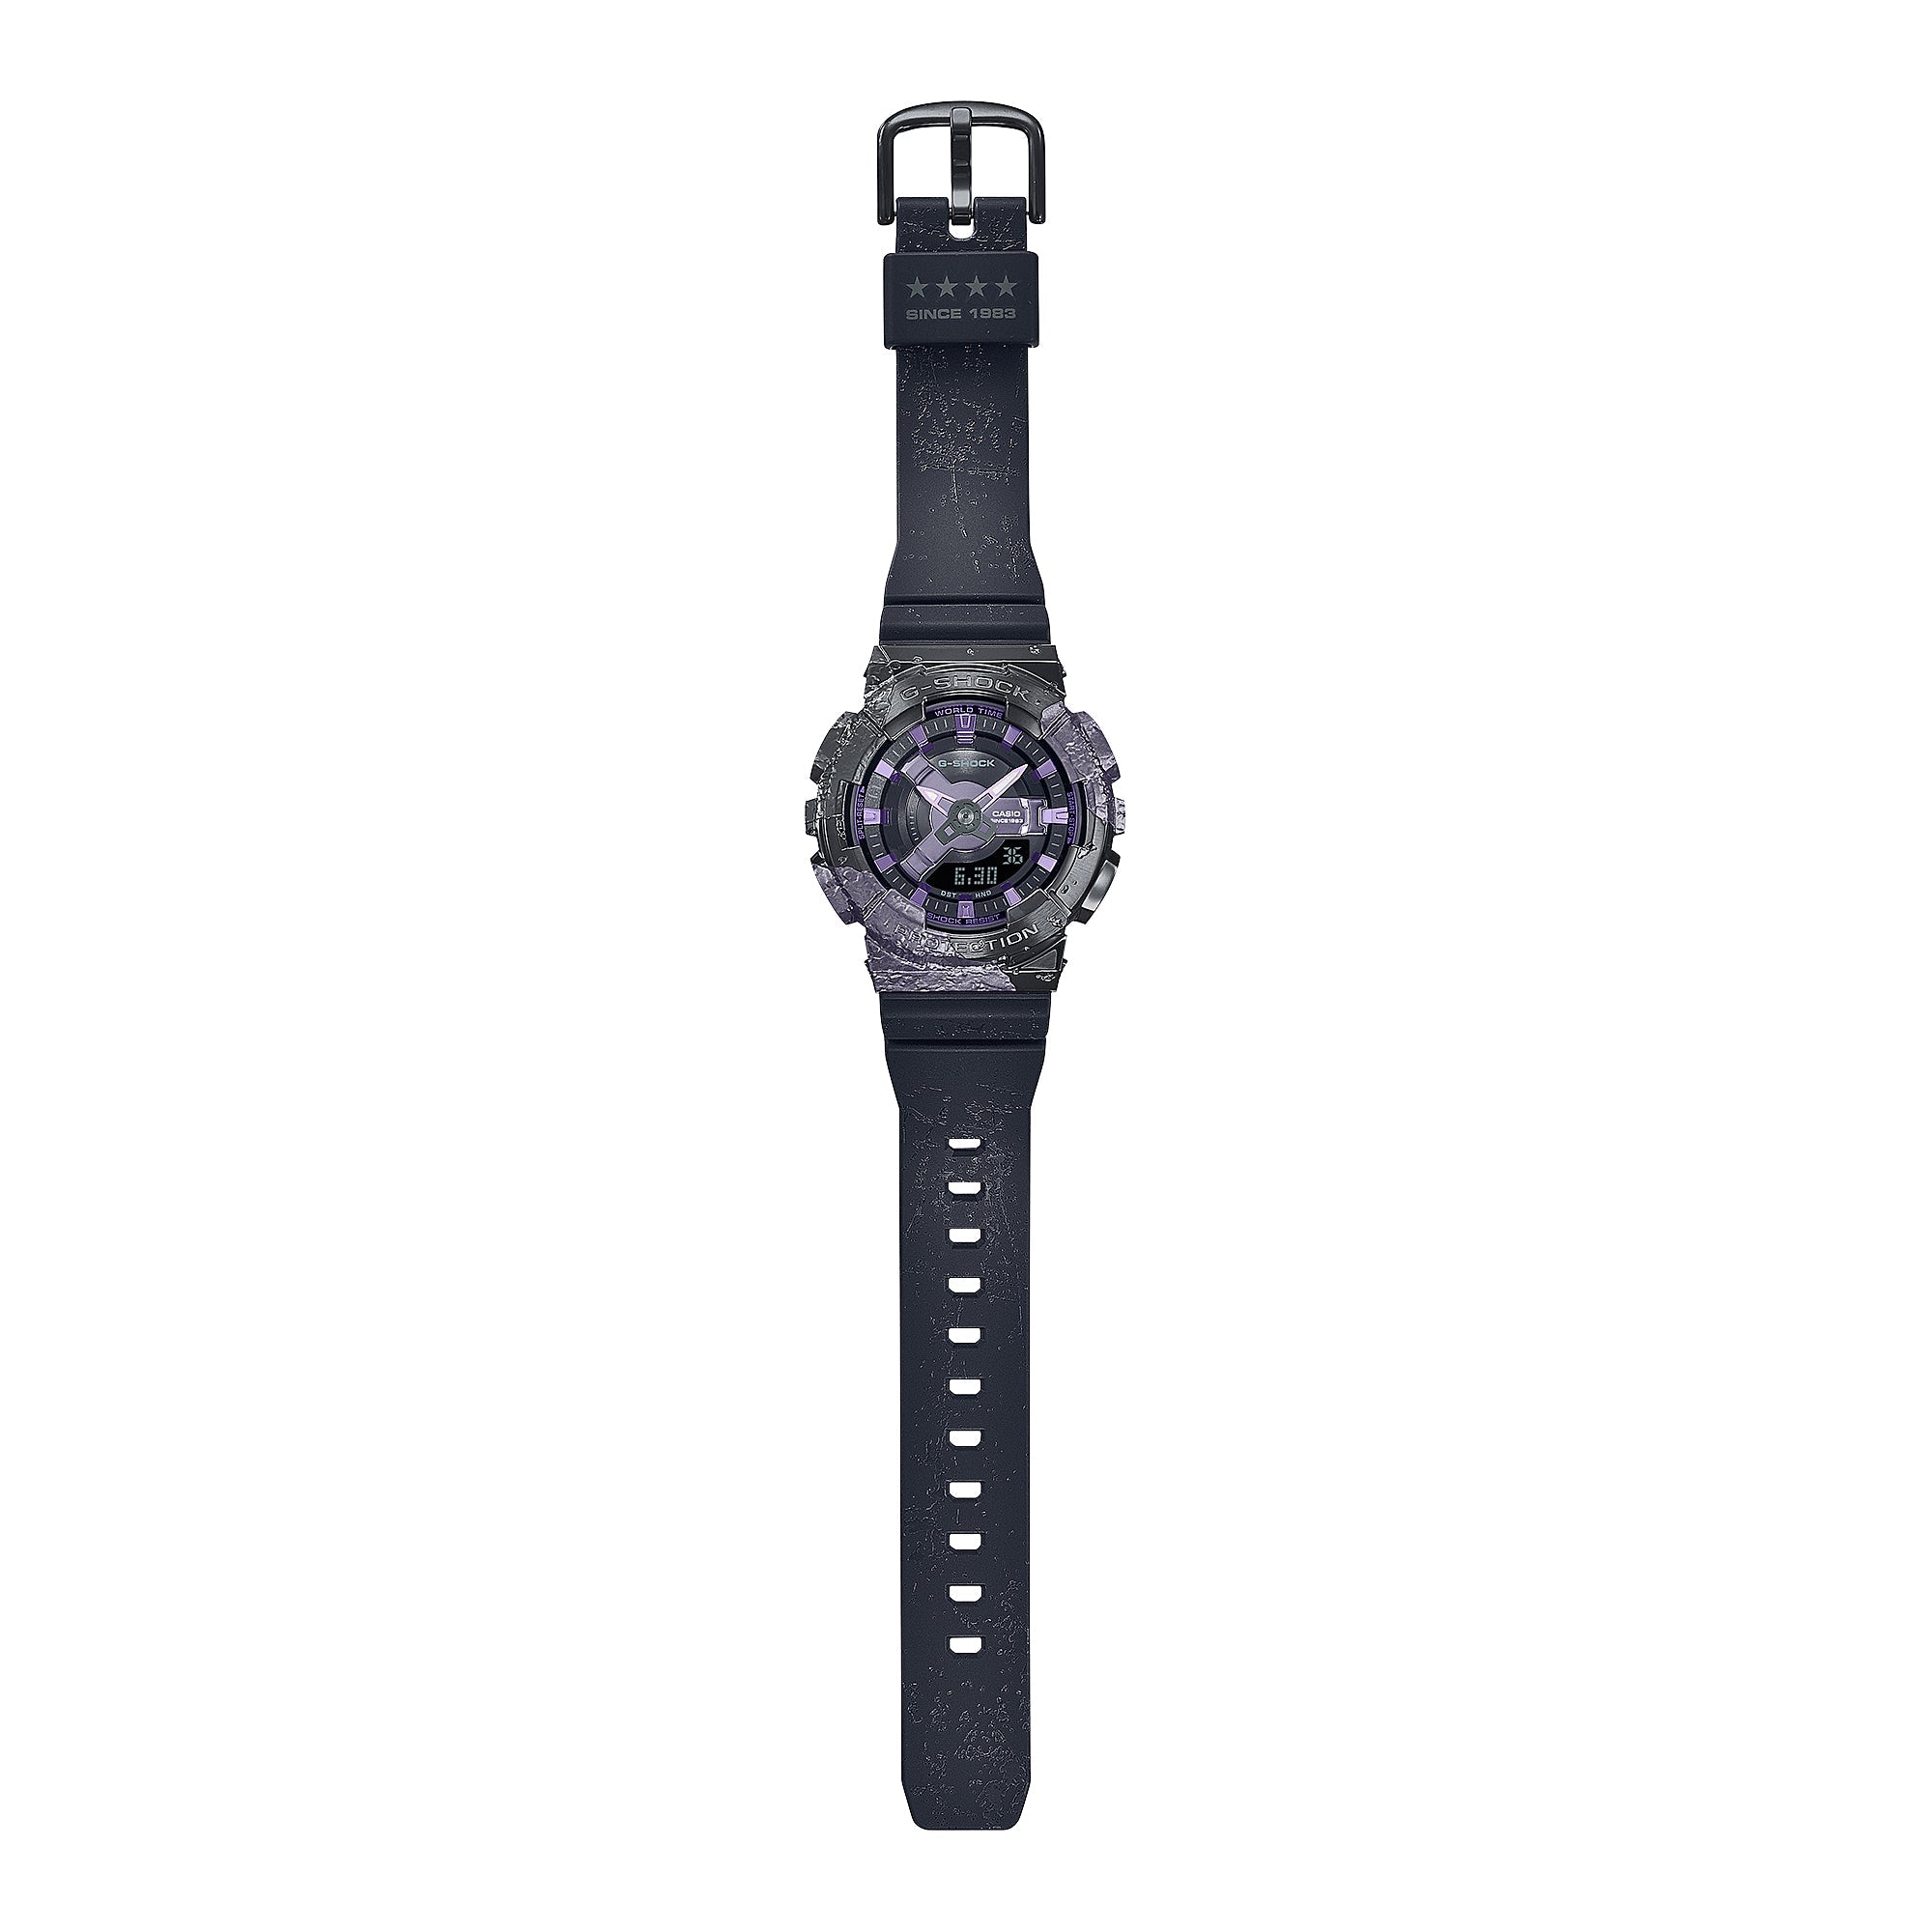 Casio G-Shock for Ladies' 40th Anniversary Adventurer’s Stone Limited Edition Textured Black Resin Band Watch GMS114GEM-1A2 GM-S114GEM-1A2 Watchspree